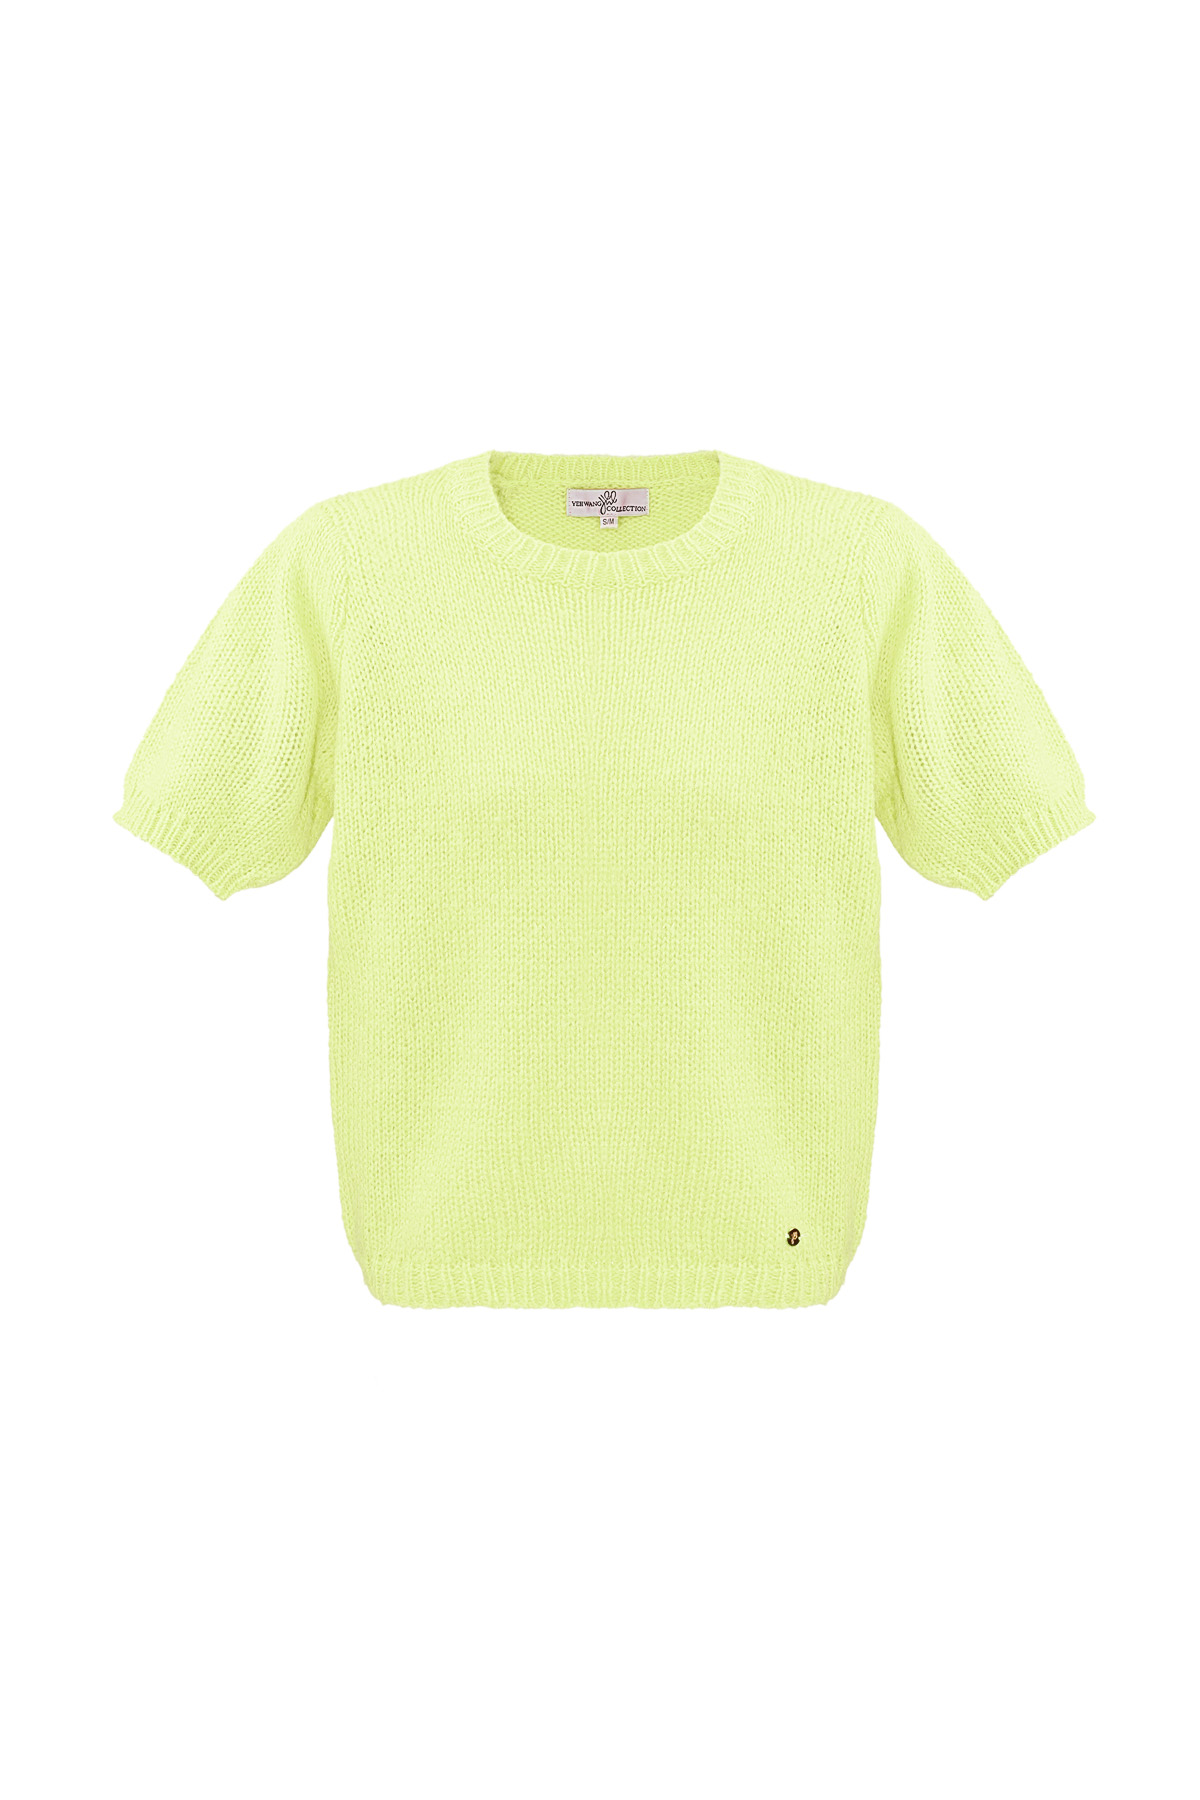 Basic shirt with puffed sleeves - yellow